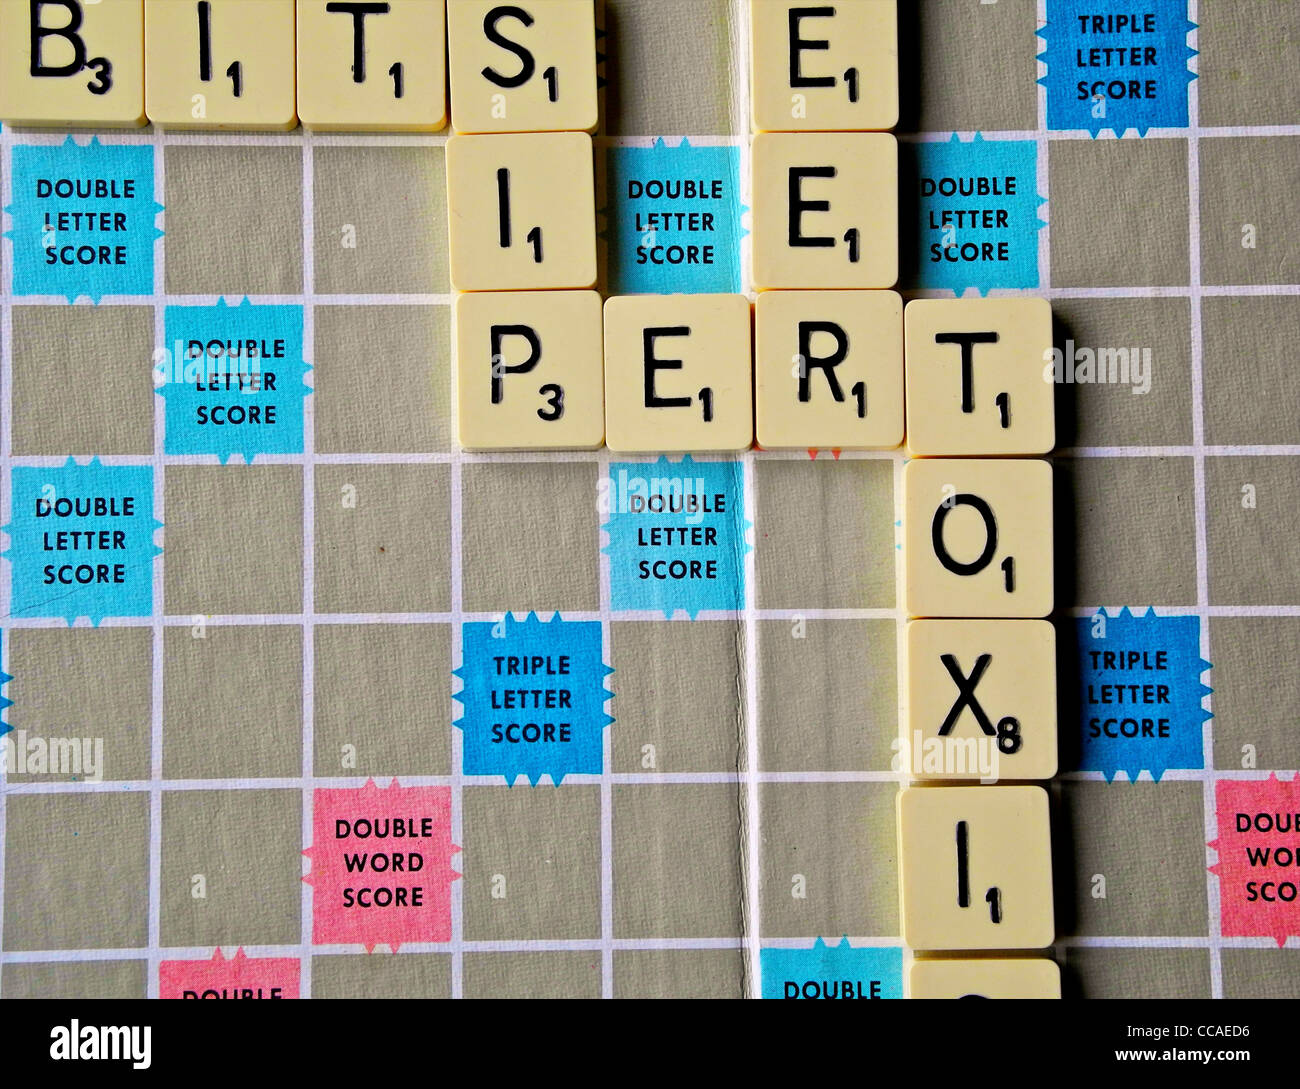 A Scrabble game board EDITORIAL USE ONLY Stock Photo